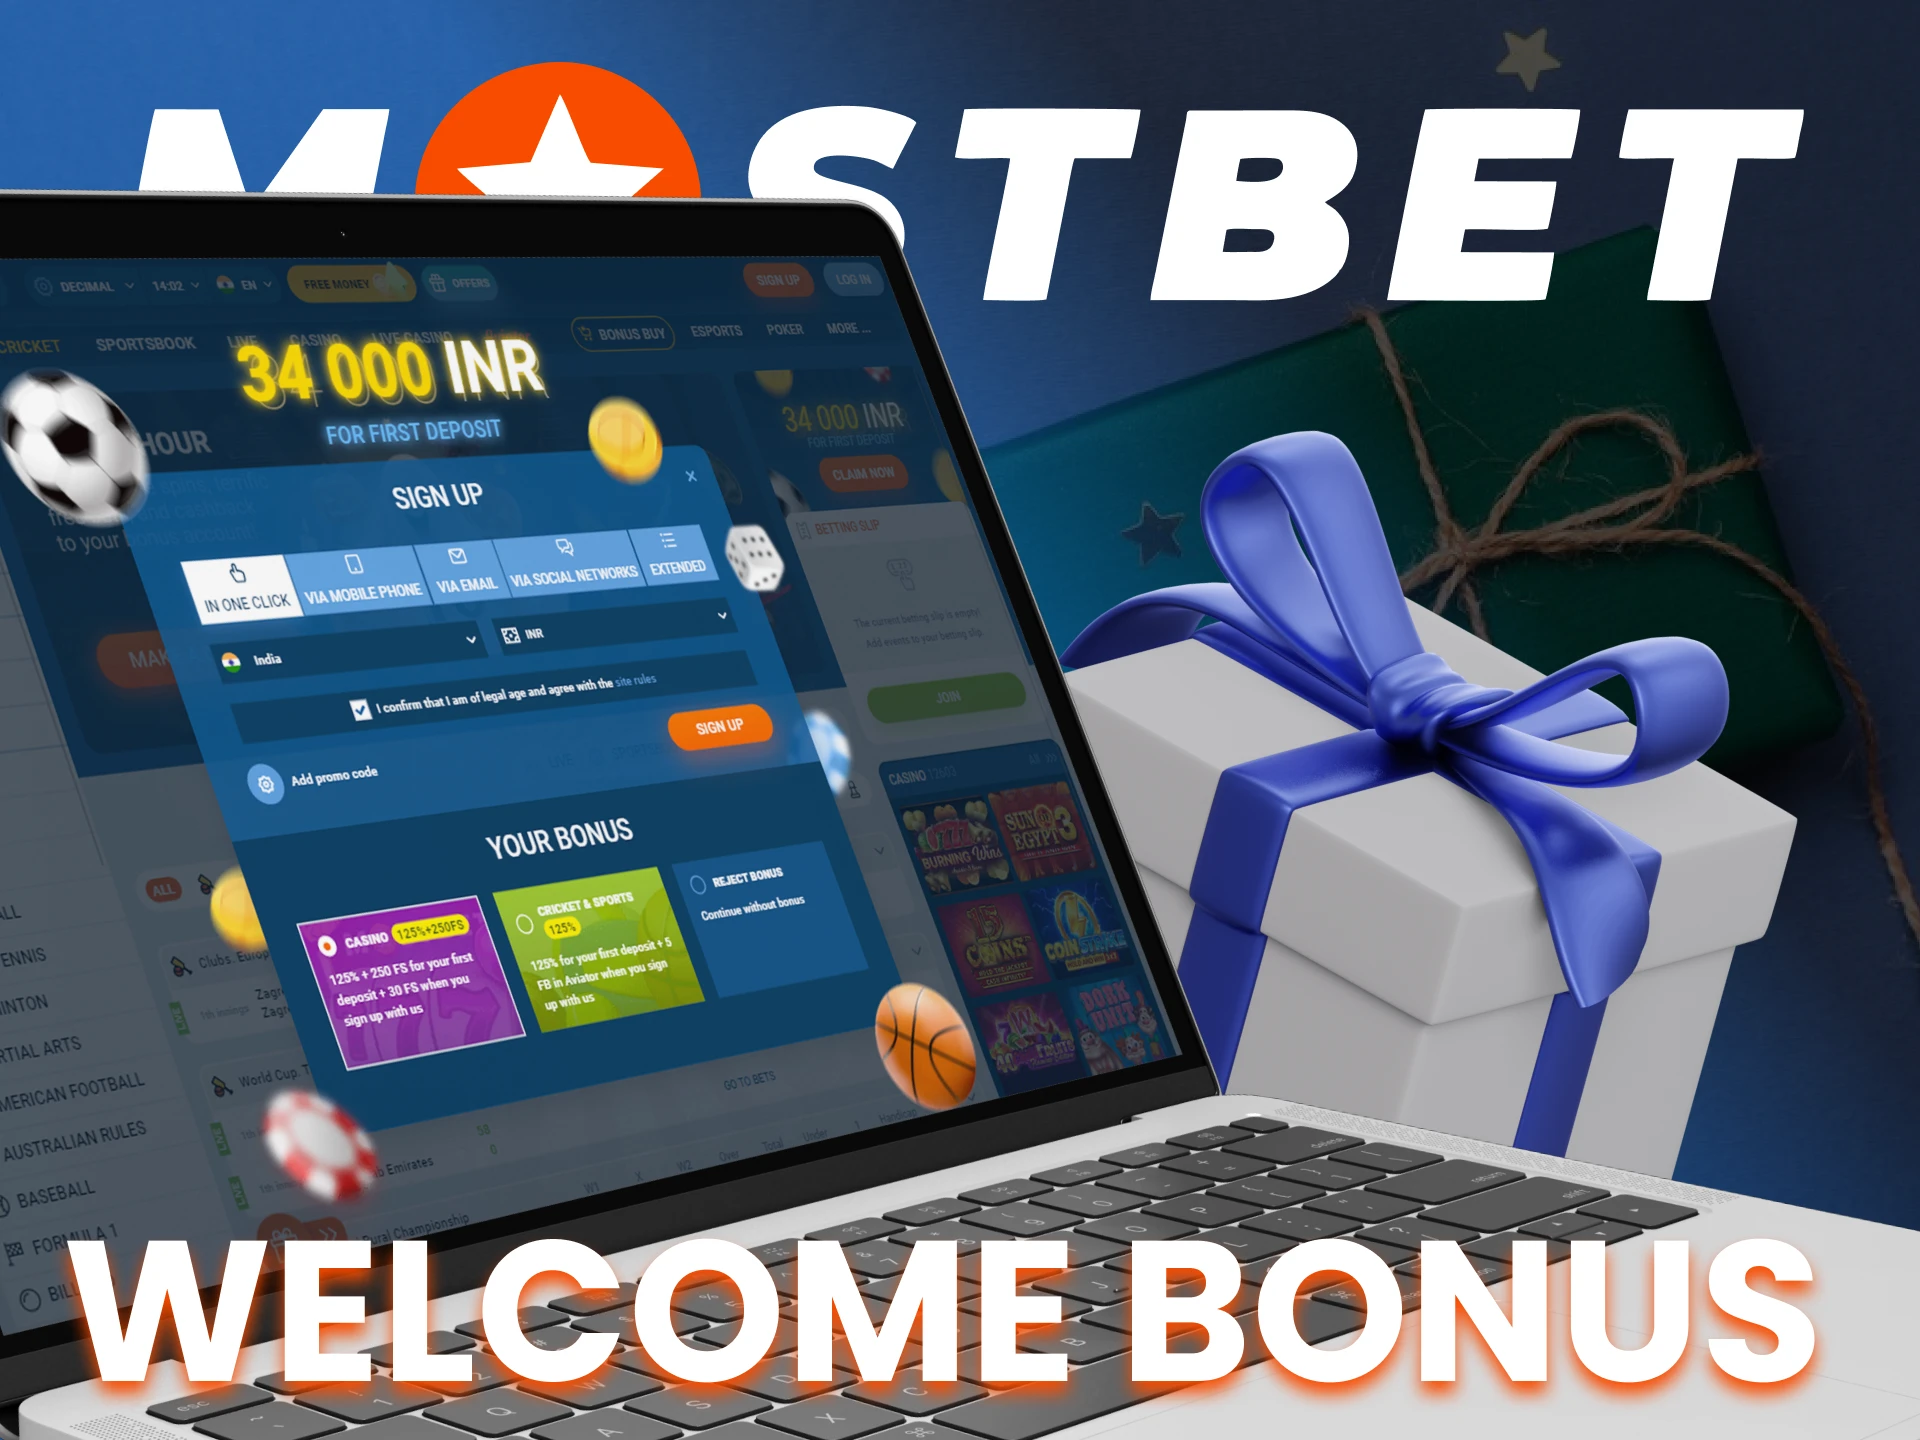 The Mostbet bookmaker suggests its users welcome bonuses that can be spent on placing bets.